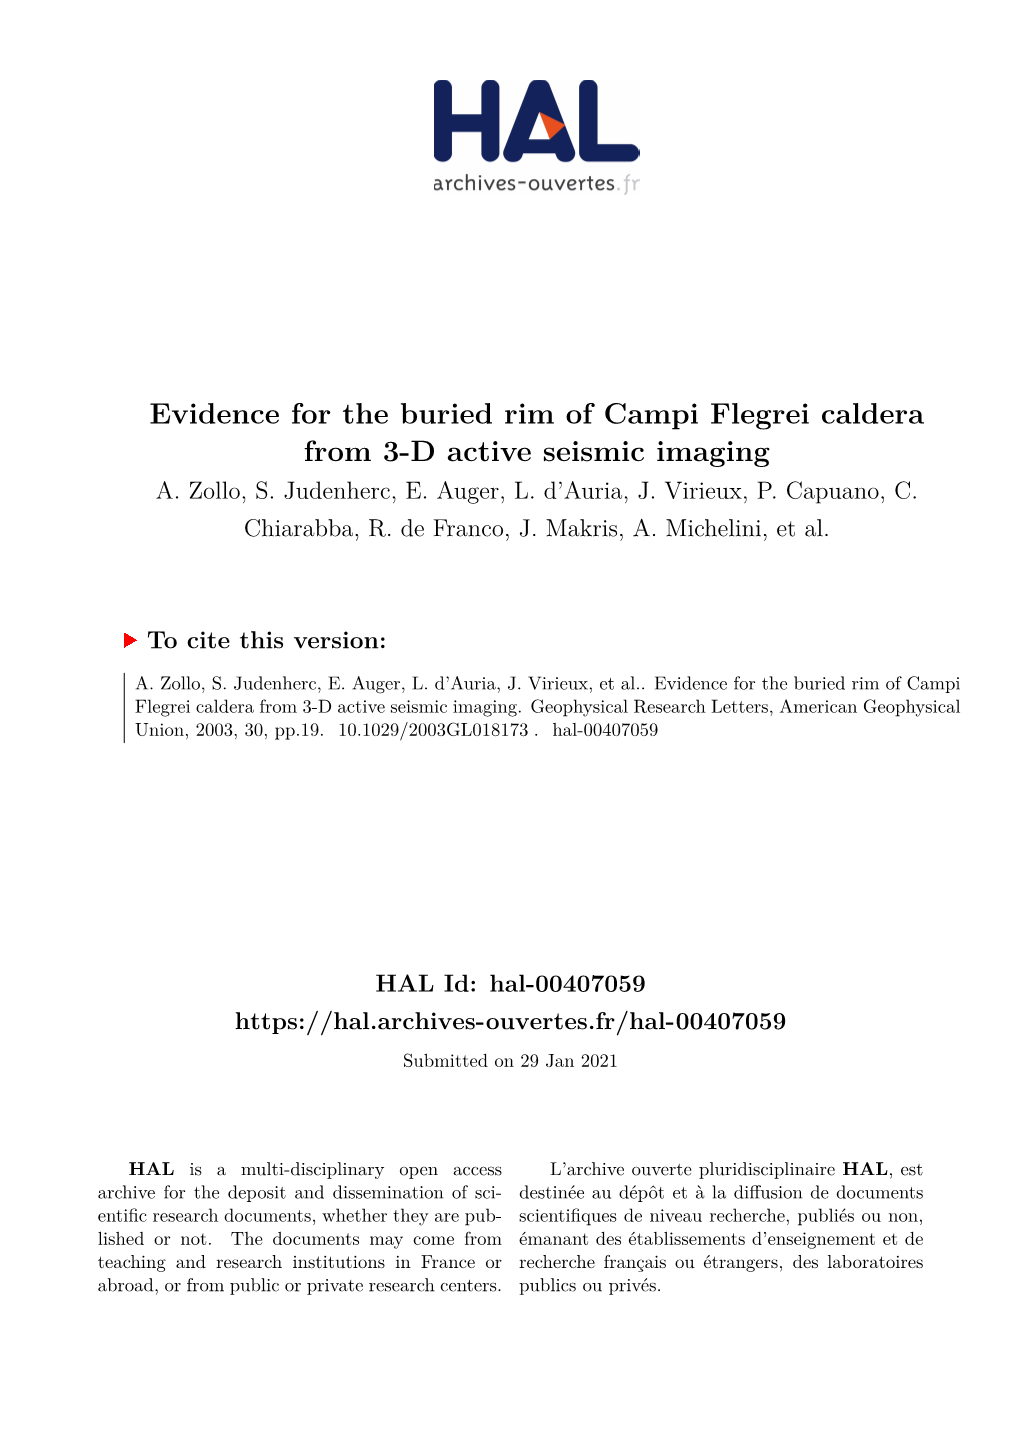 Evidence for the Buried Rim of Campi Flegrei Caldera from 3-D Active Seismic Imaging A